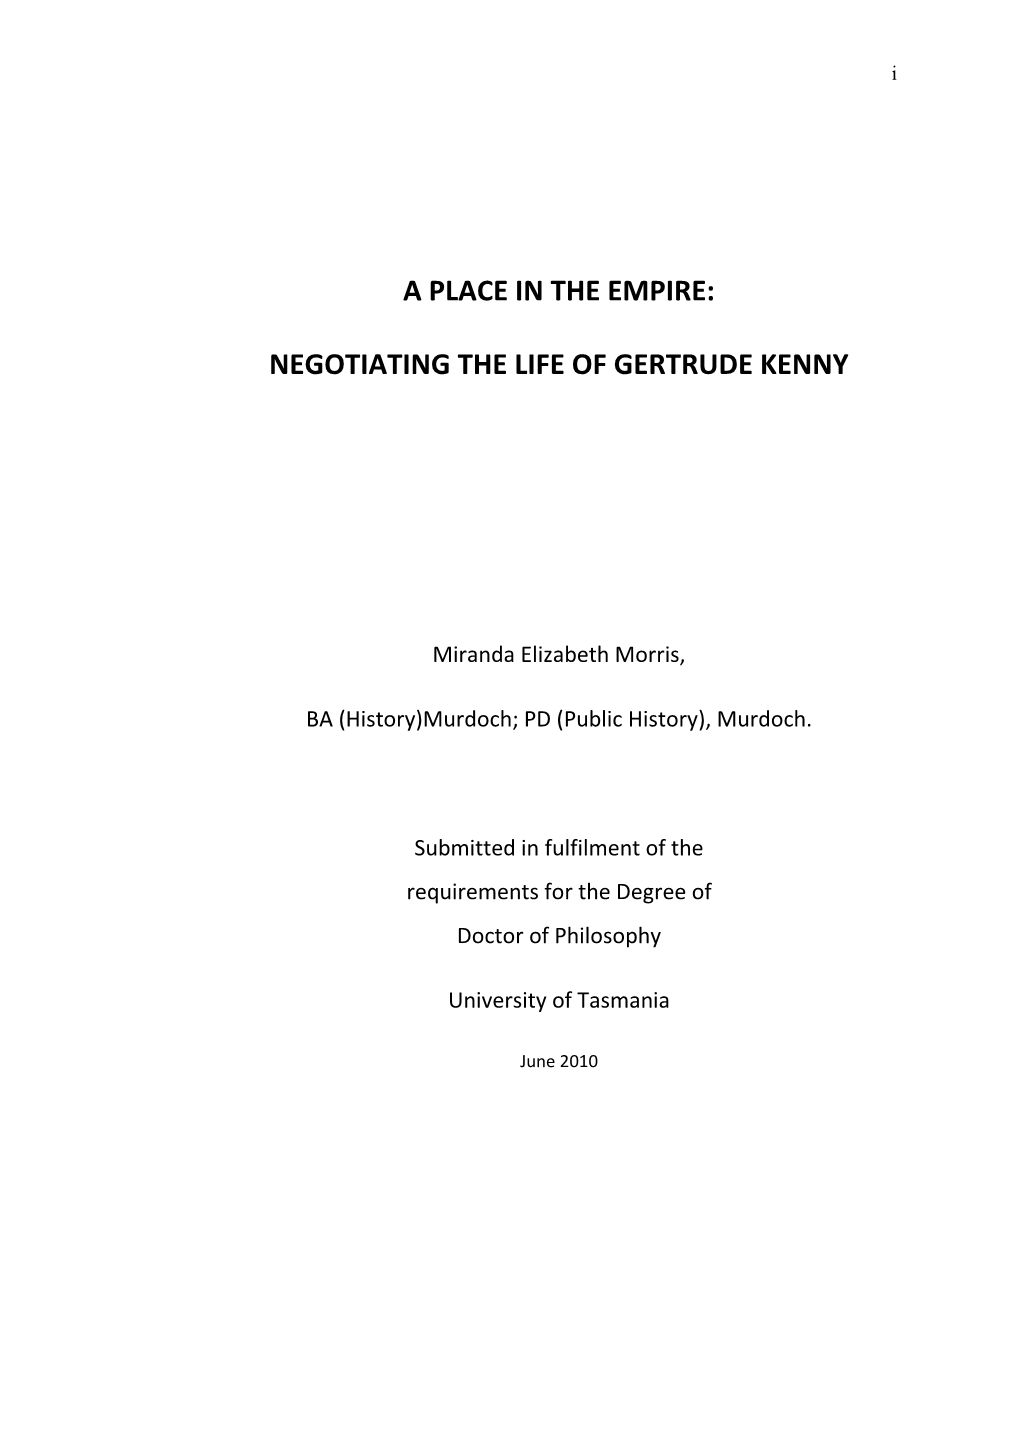 A Place in the Empire: Negotiating the Life Of